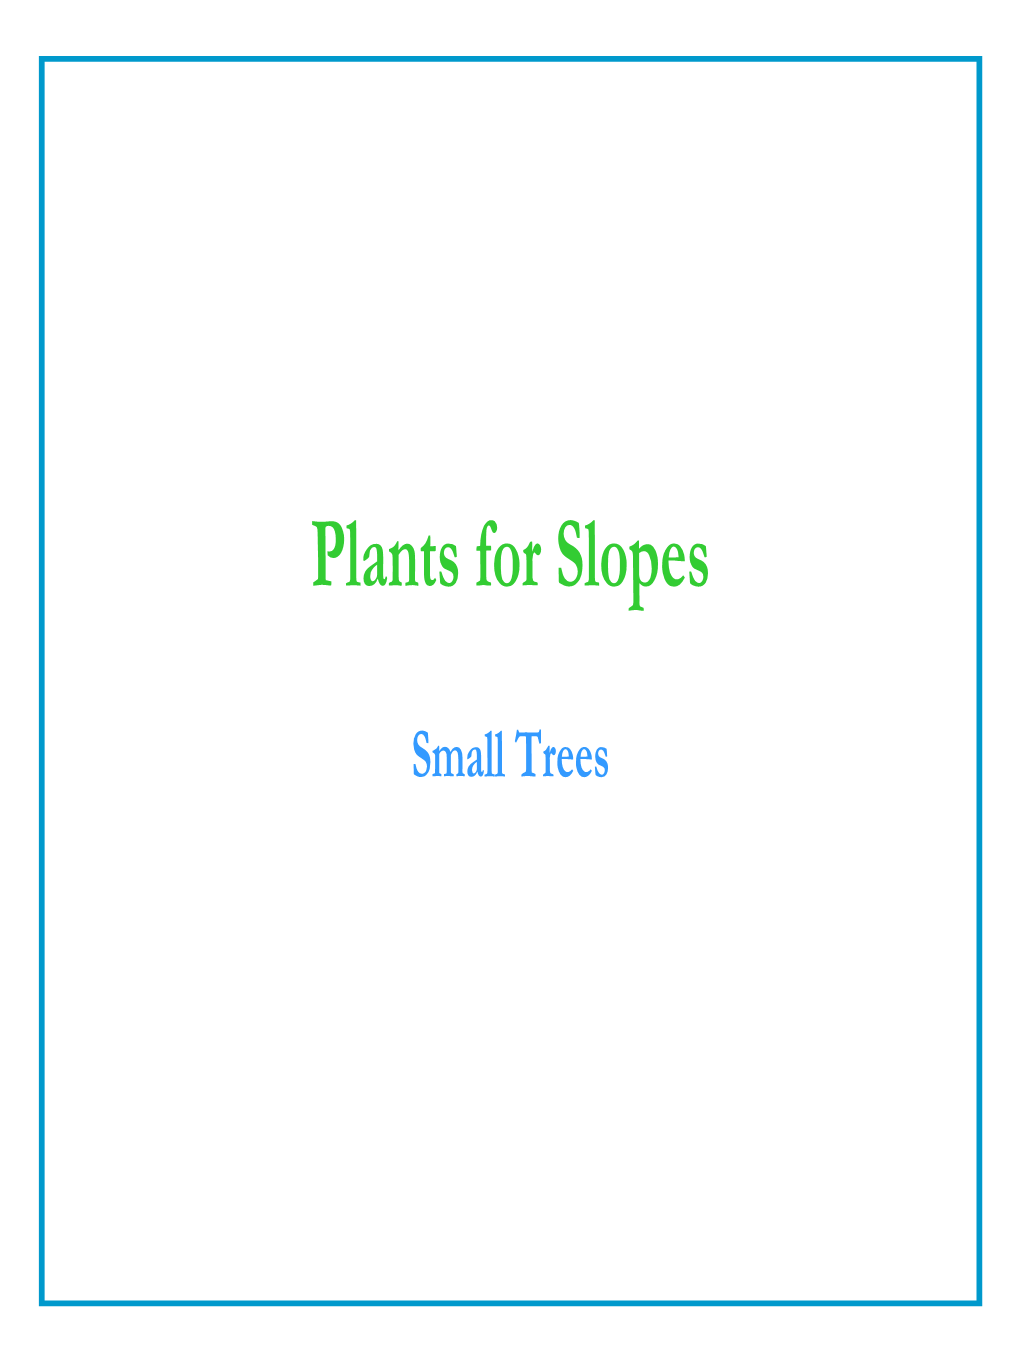 Plants for Slopes (With Photos)